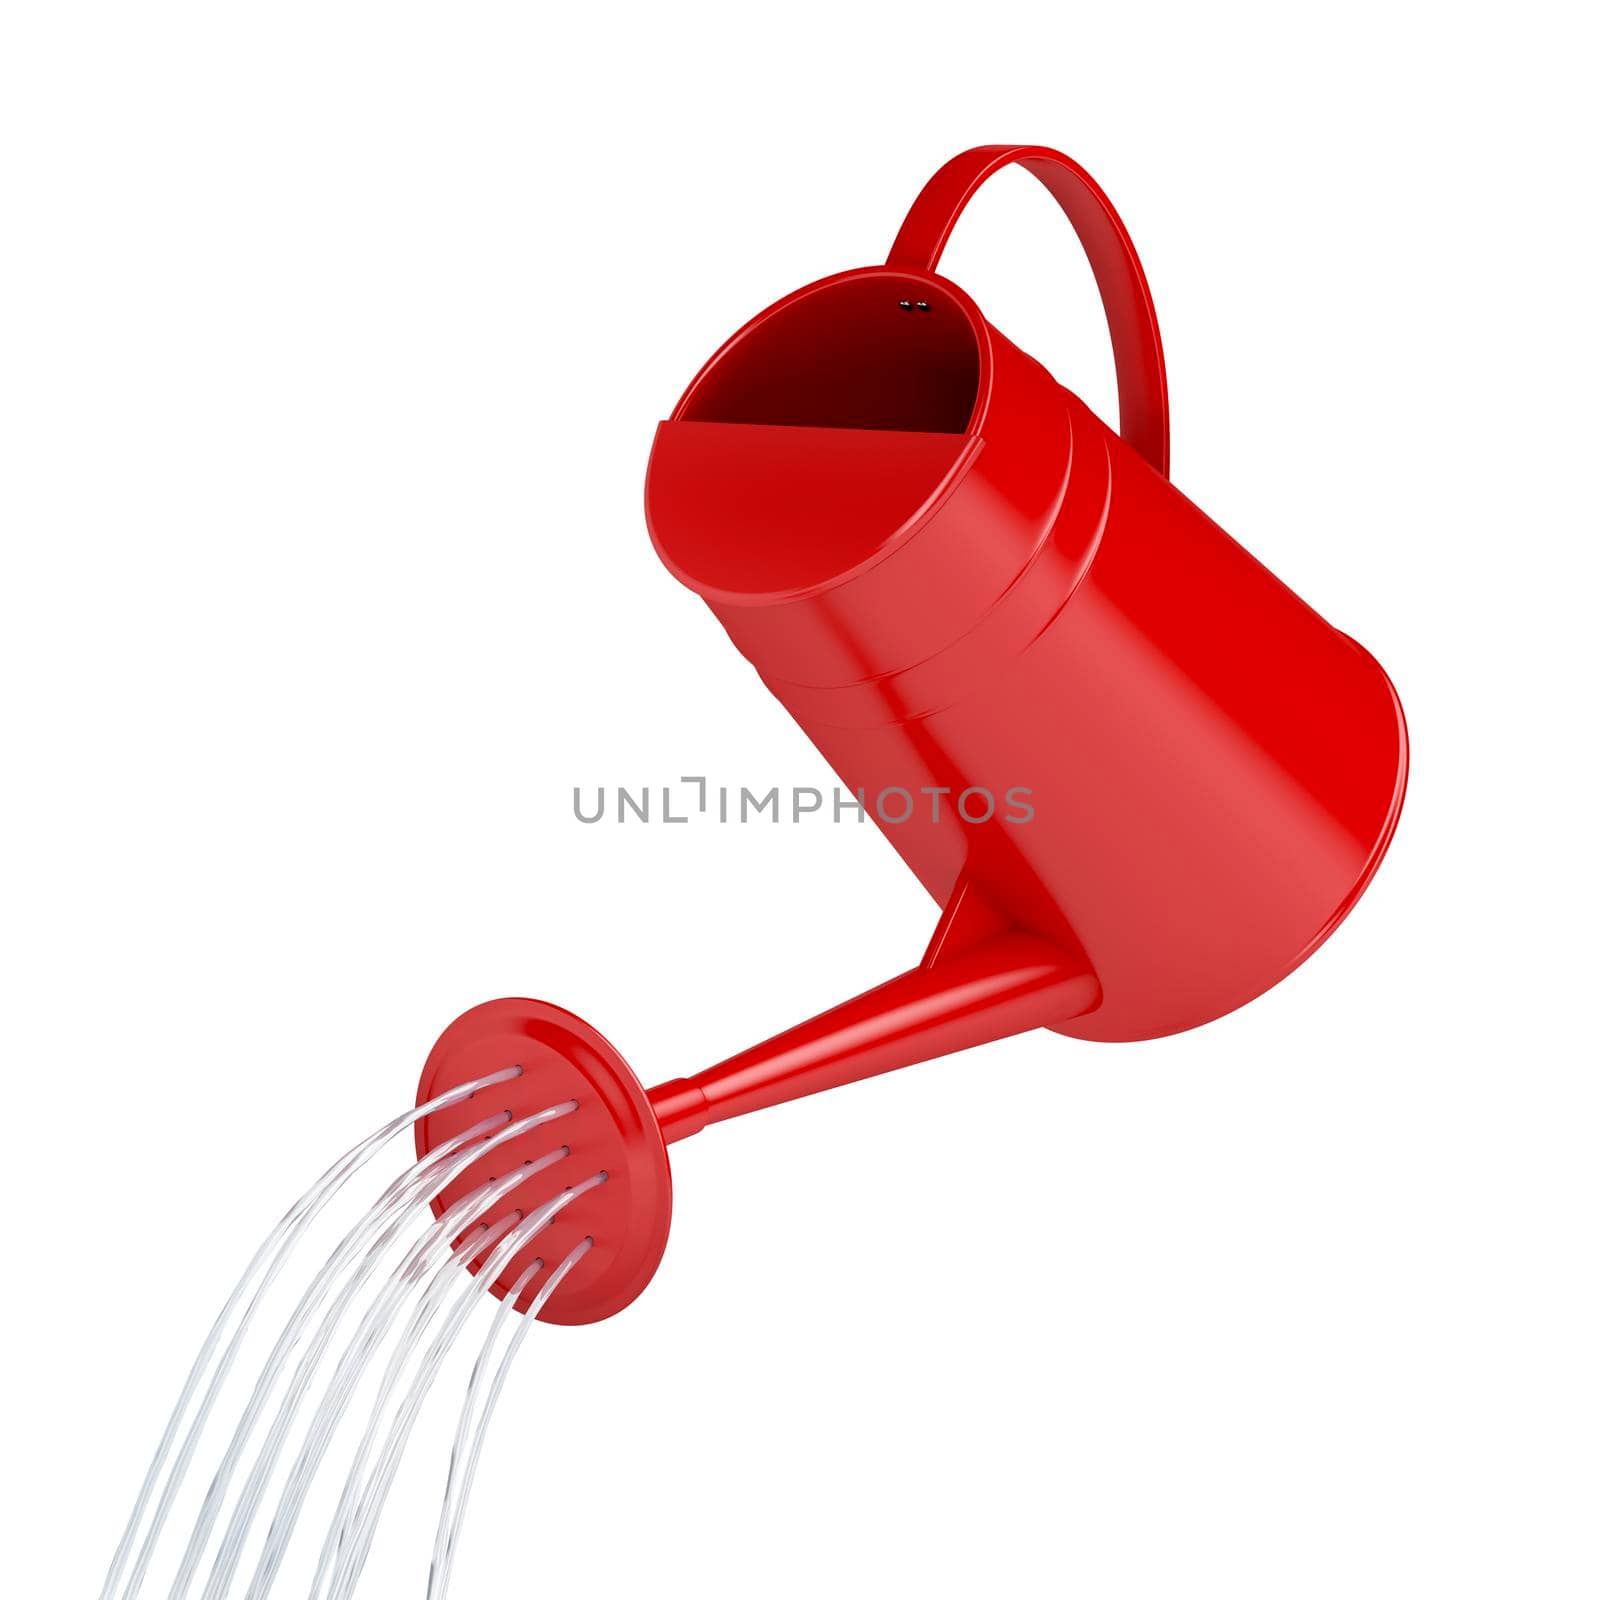 Pouring water from a red watering can by magraphics